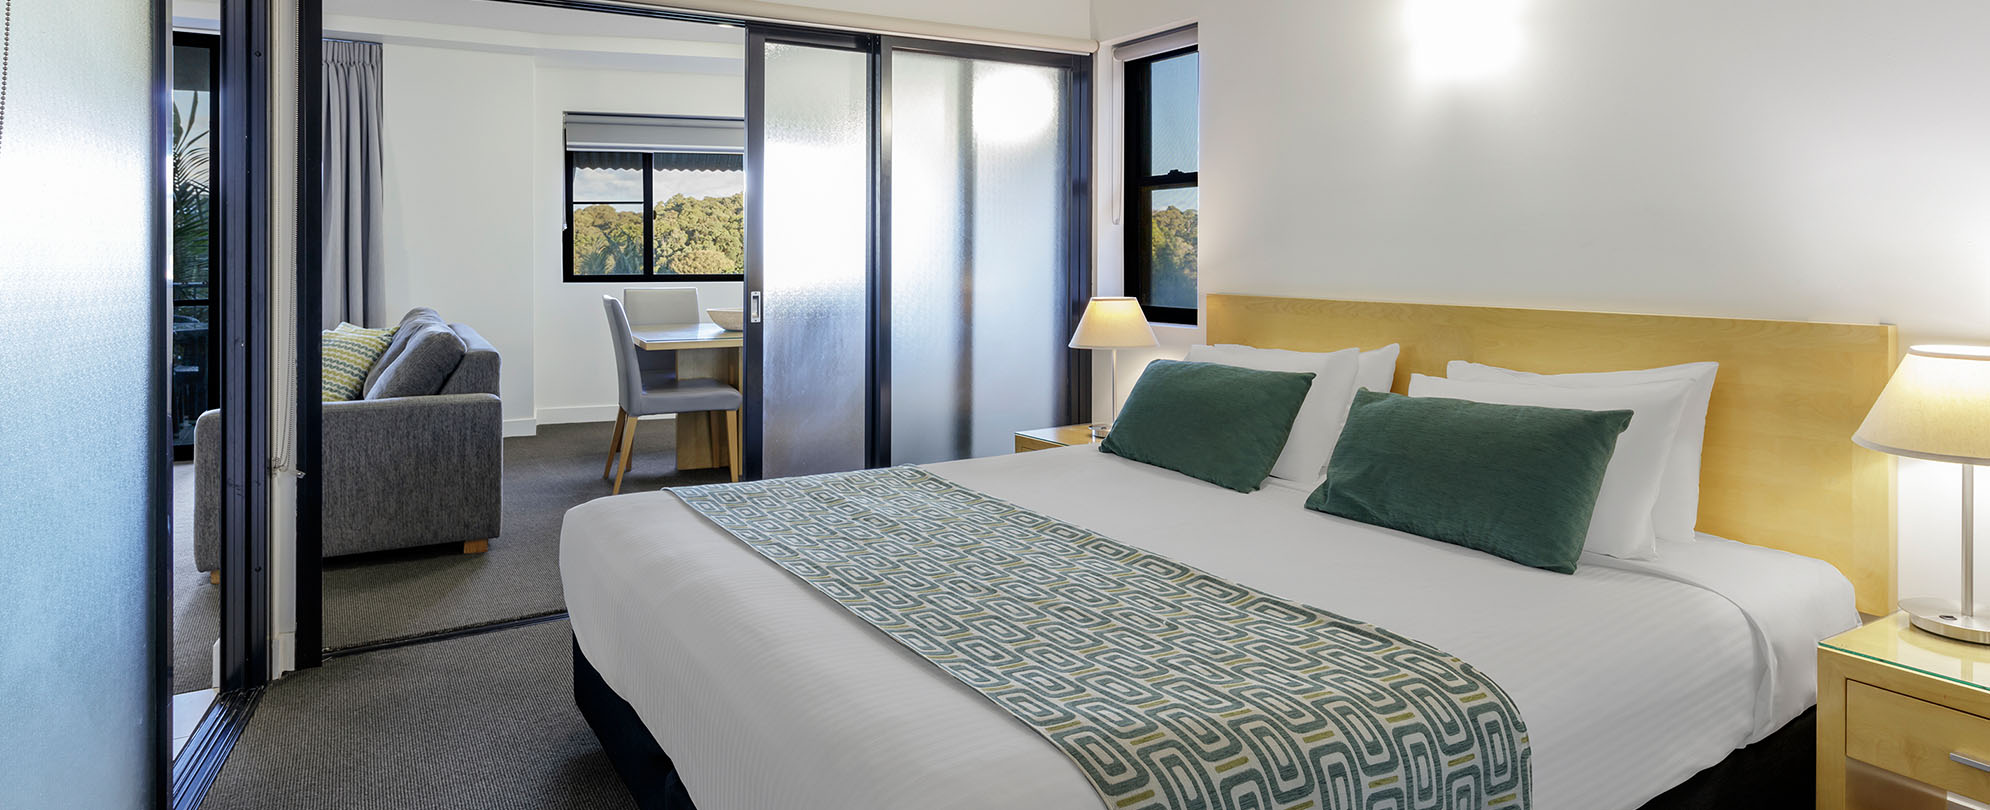 A king-sized bed in a bedroom of a 1-bedroom suite at Club Wyndham Coffs Harbor.